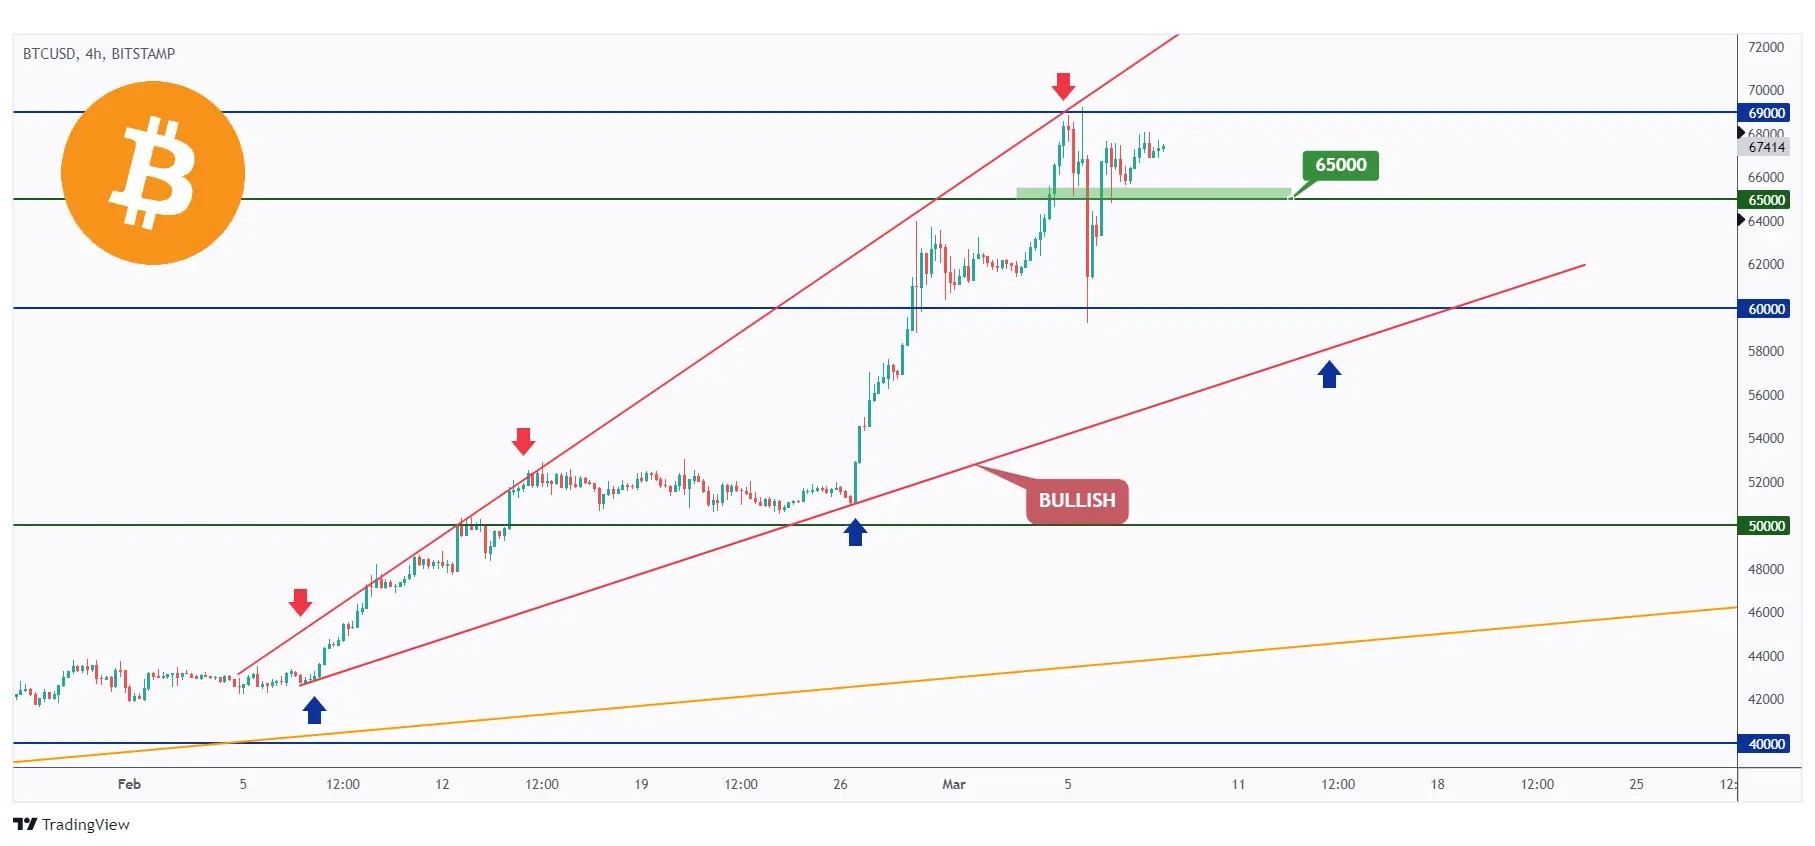 BTC 4h chart hovering between $65,000 support and $69,000 resistance.